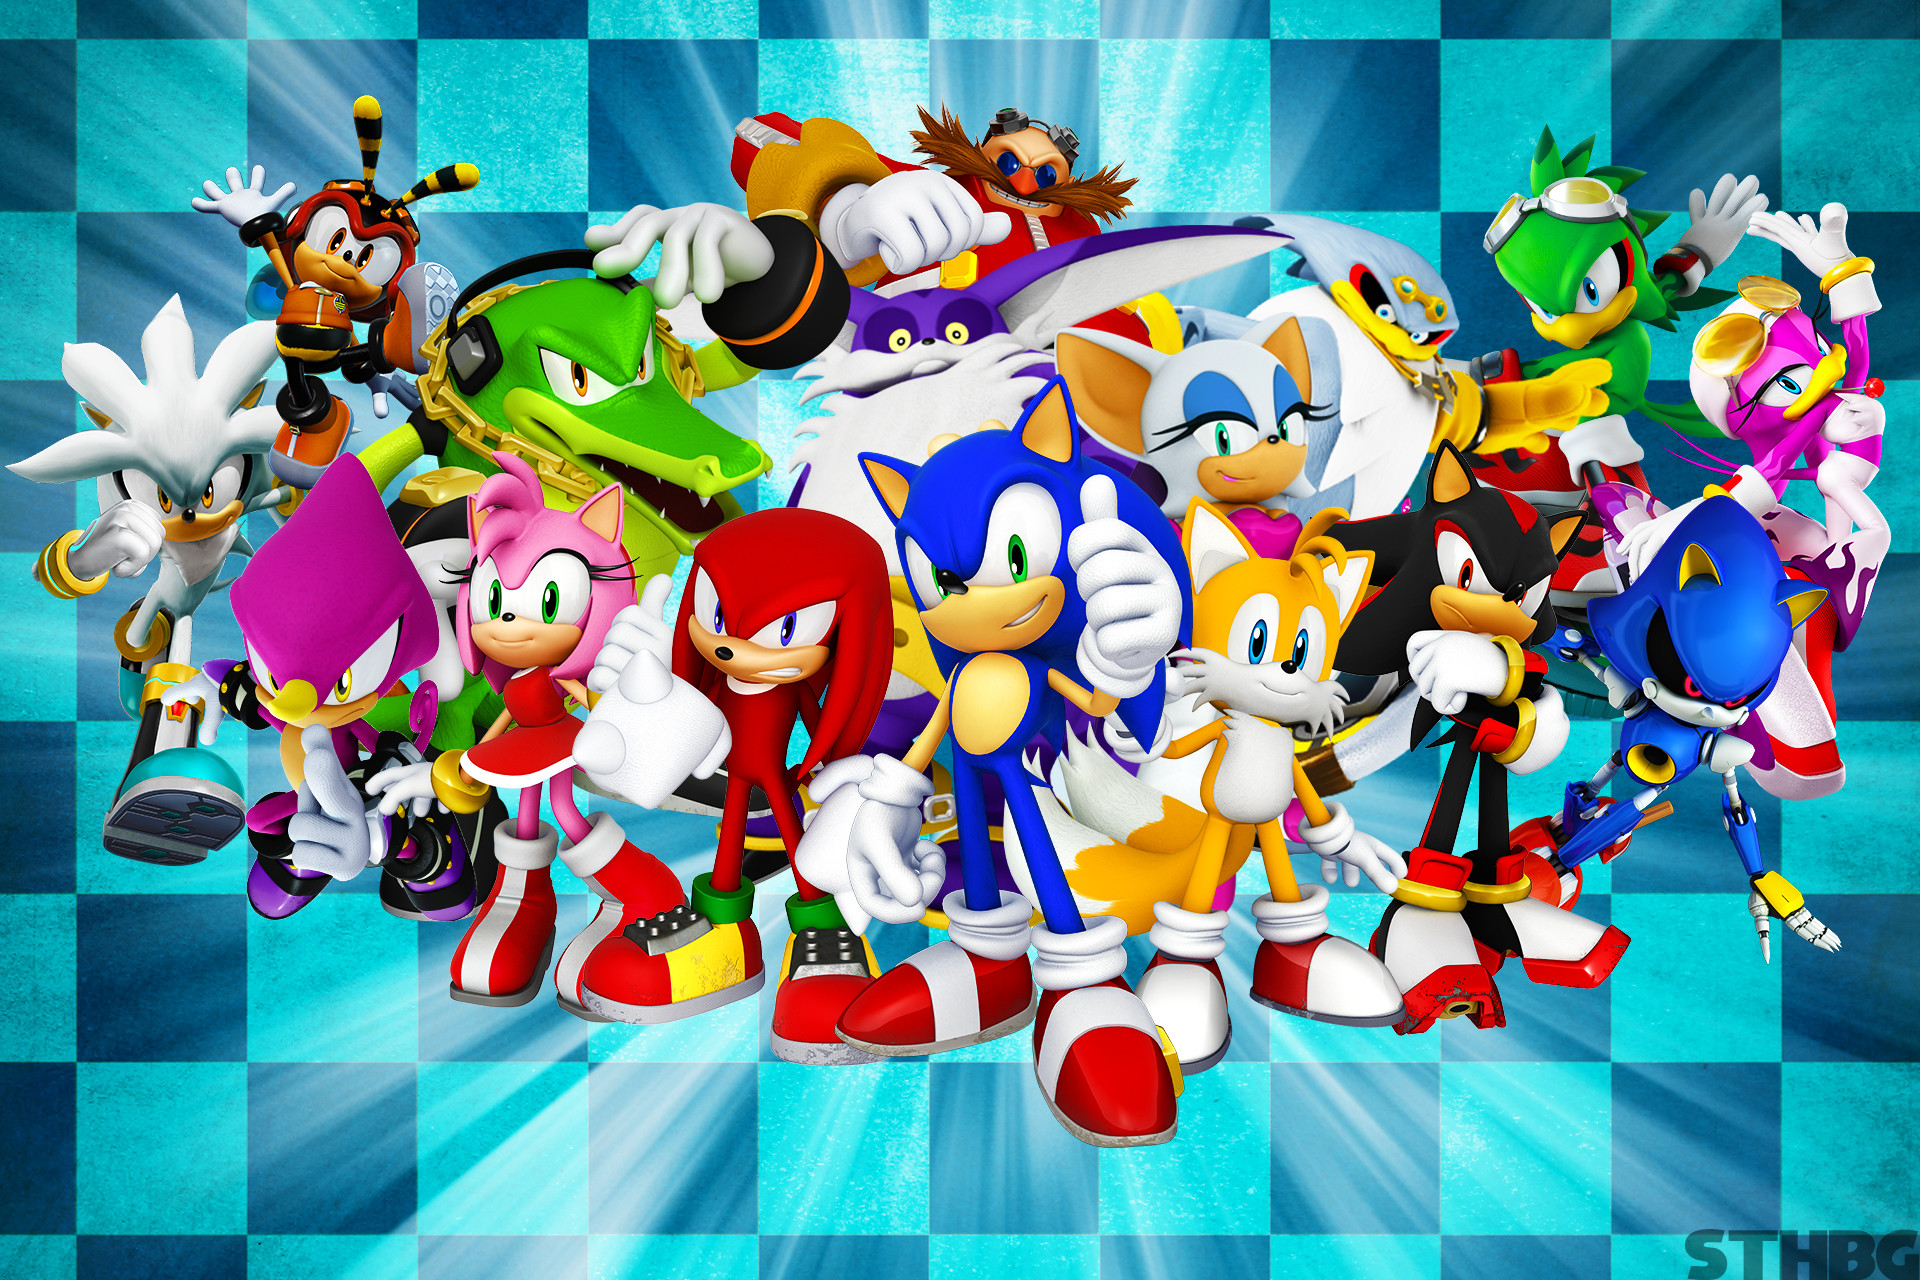 1920x1280 Hypothetical Casting: Sonic the Hedgehog.  sonic_the_hedgehog_and_friends_wallpaper_by_sonicthehedgehogbg-d6s9eds